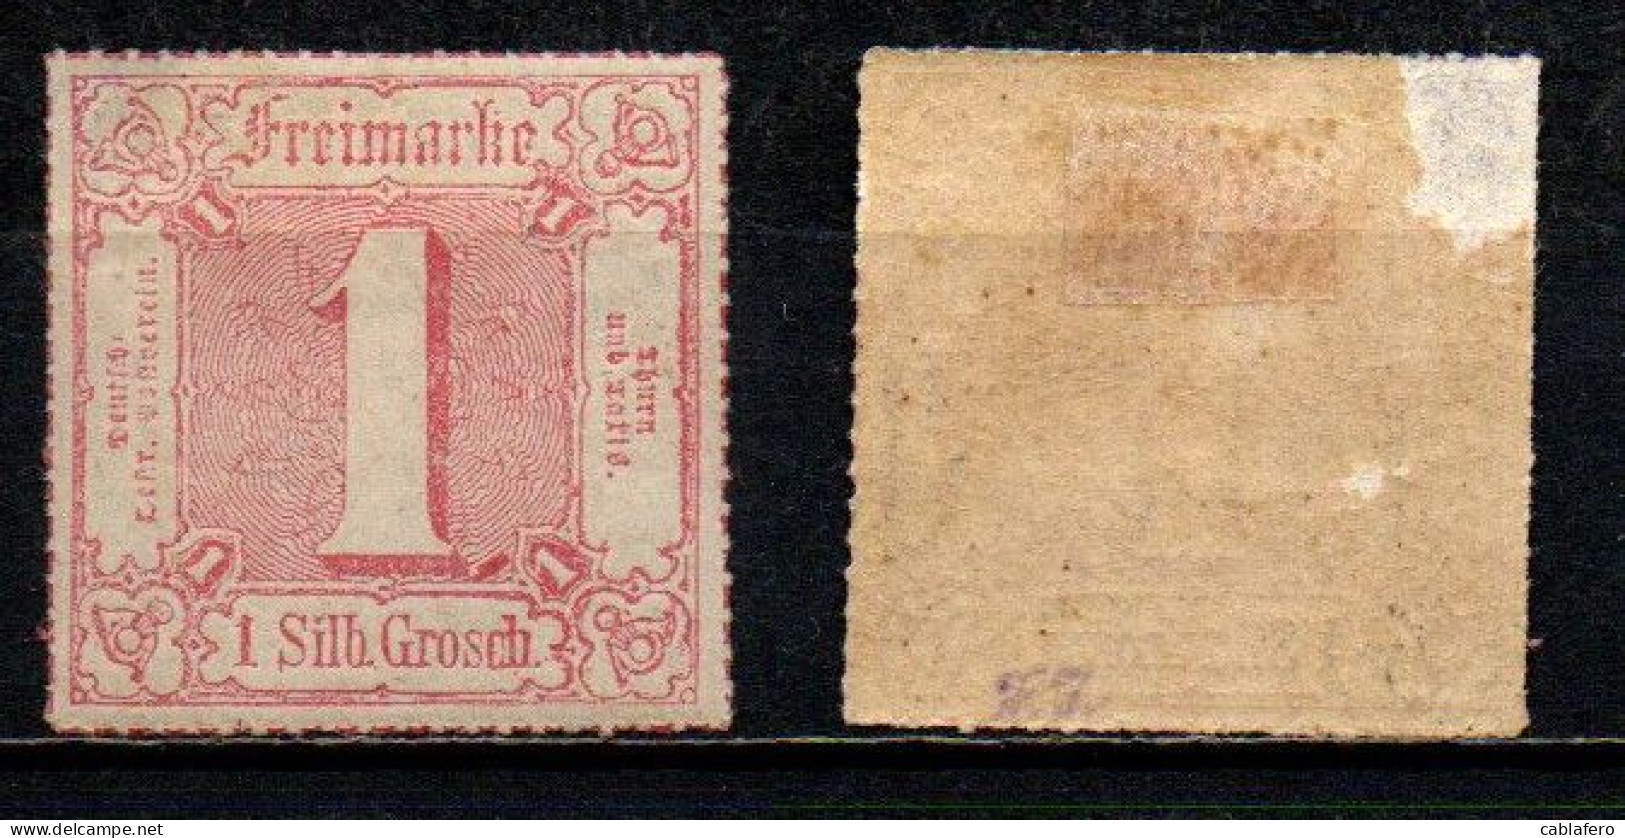 THURN UND TAXIS - 1862 - CIFRA - 1 S. - MH - Nuevos